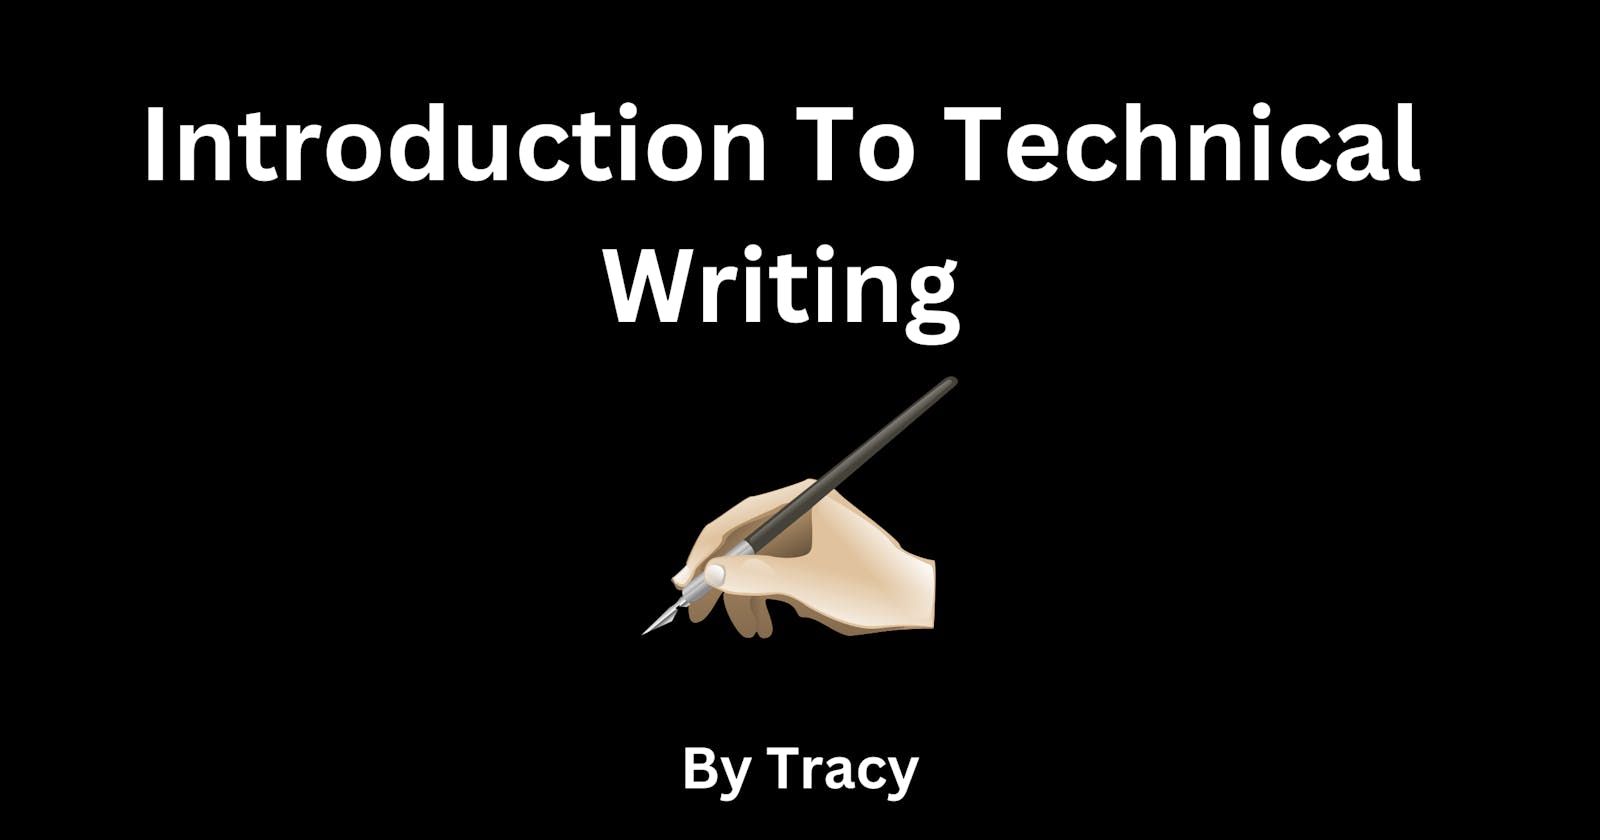 Introduction To Technical Writing: A beginner's guide